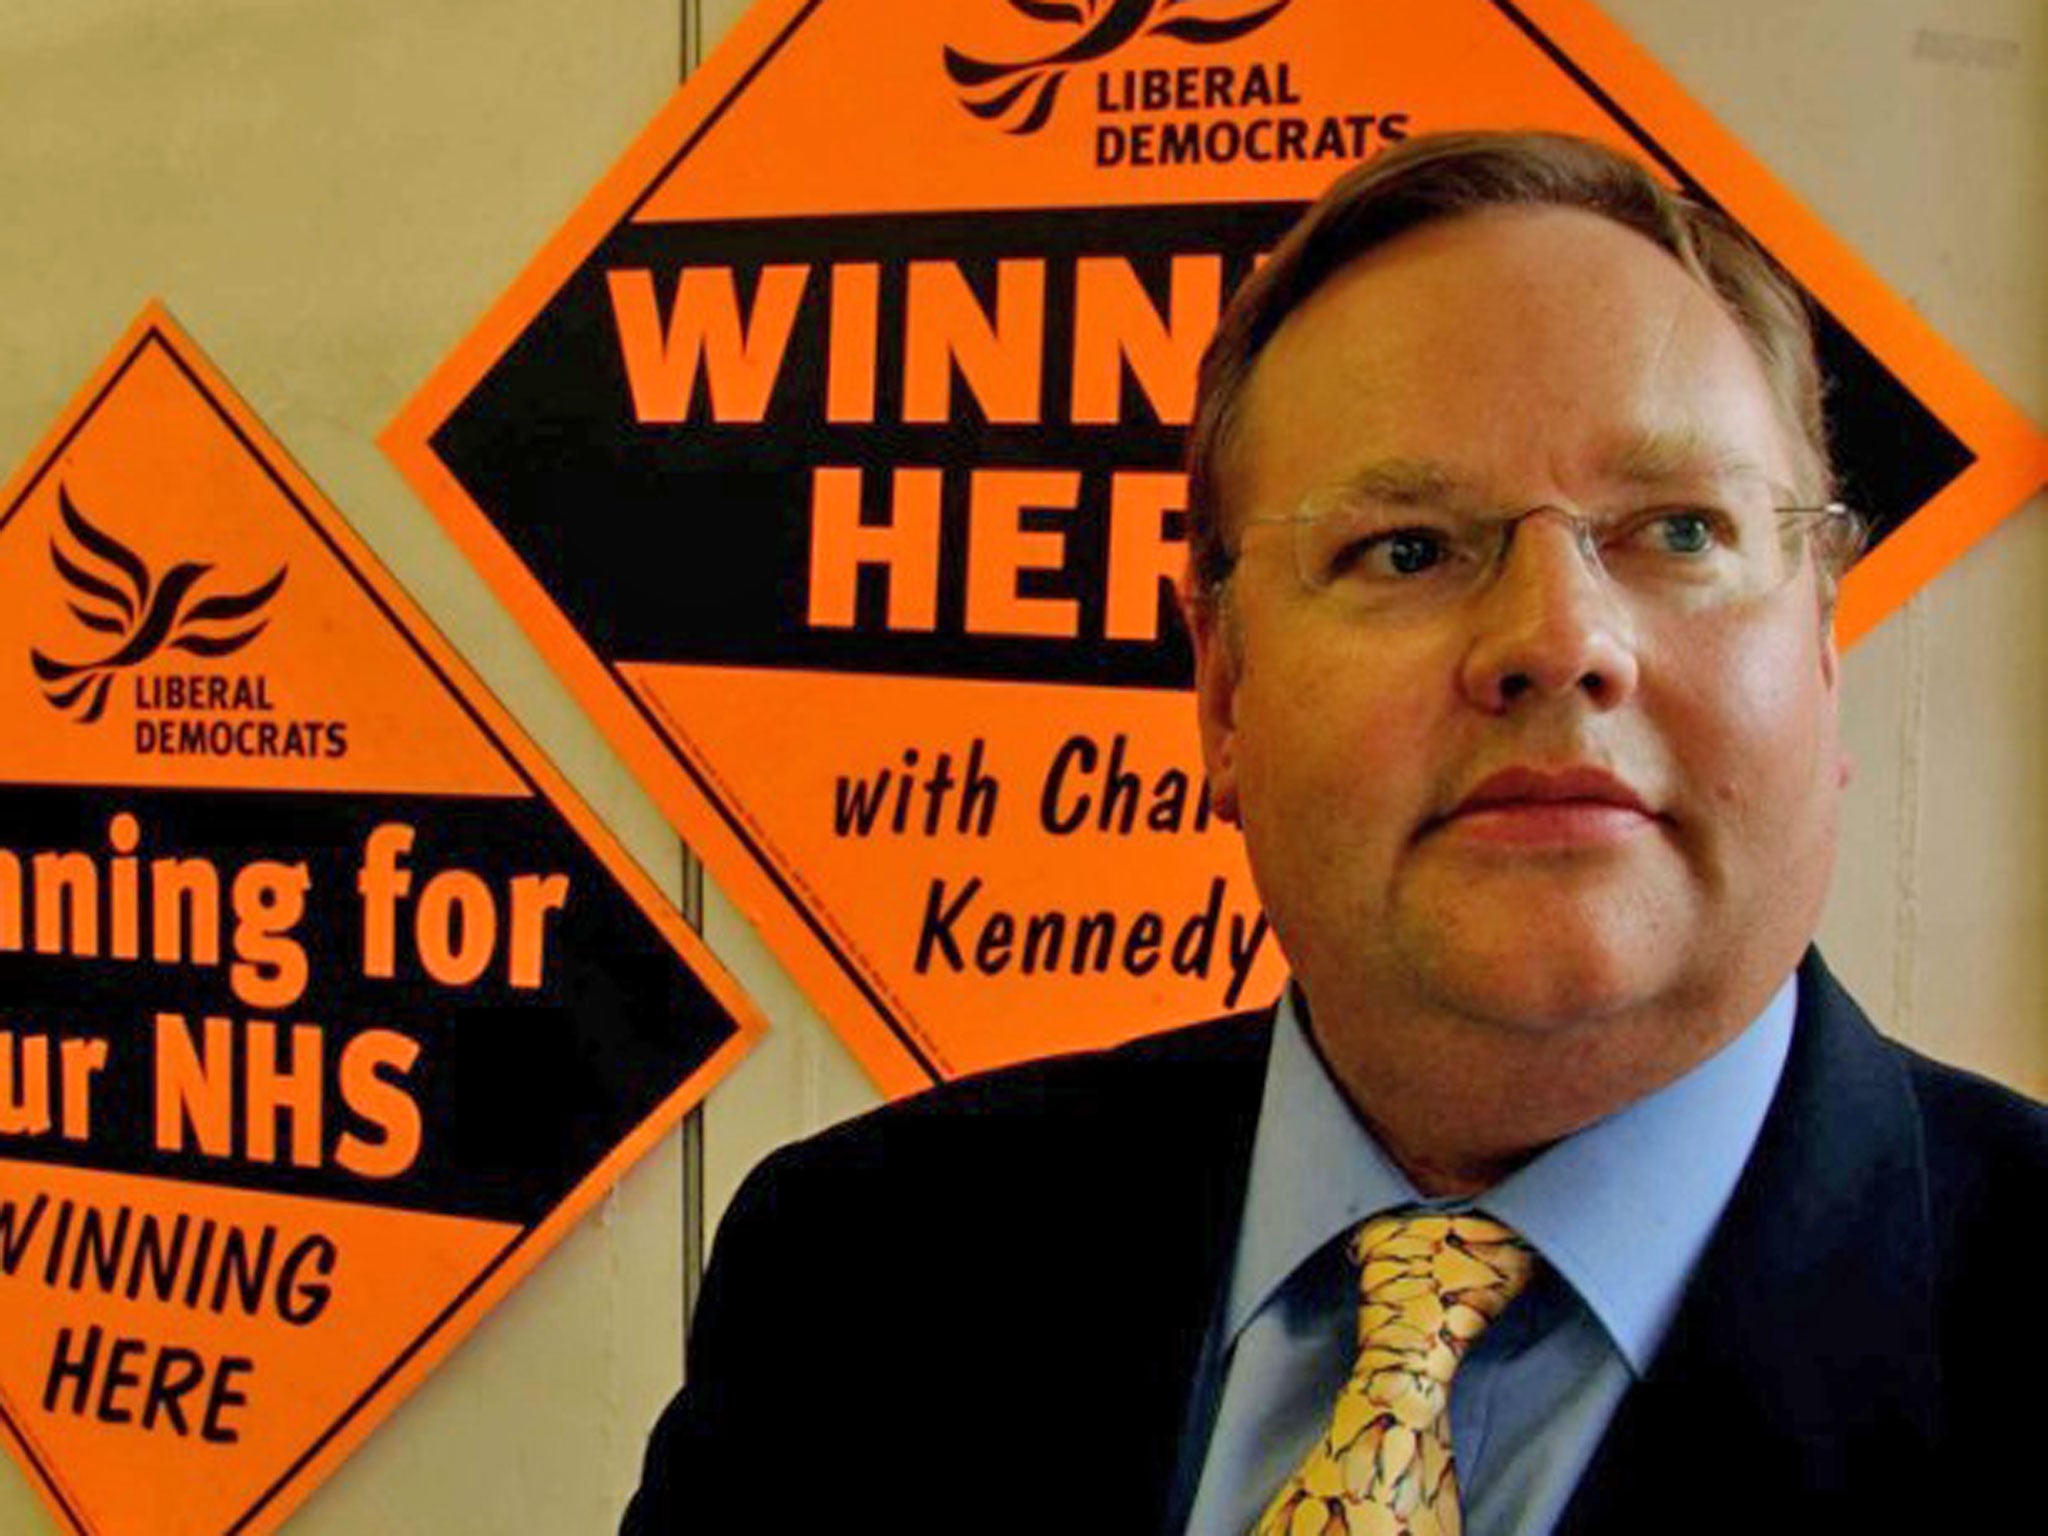 Police launch investigation into sexual harassment allegations against Lib Dem peer Lord Rennard